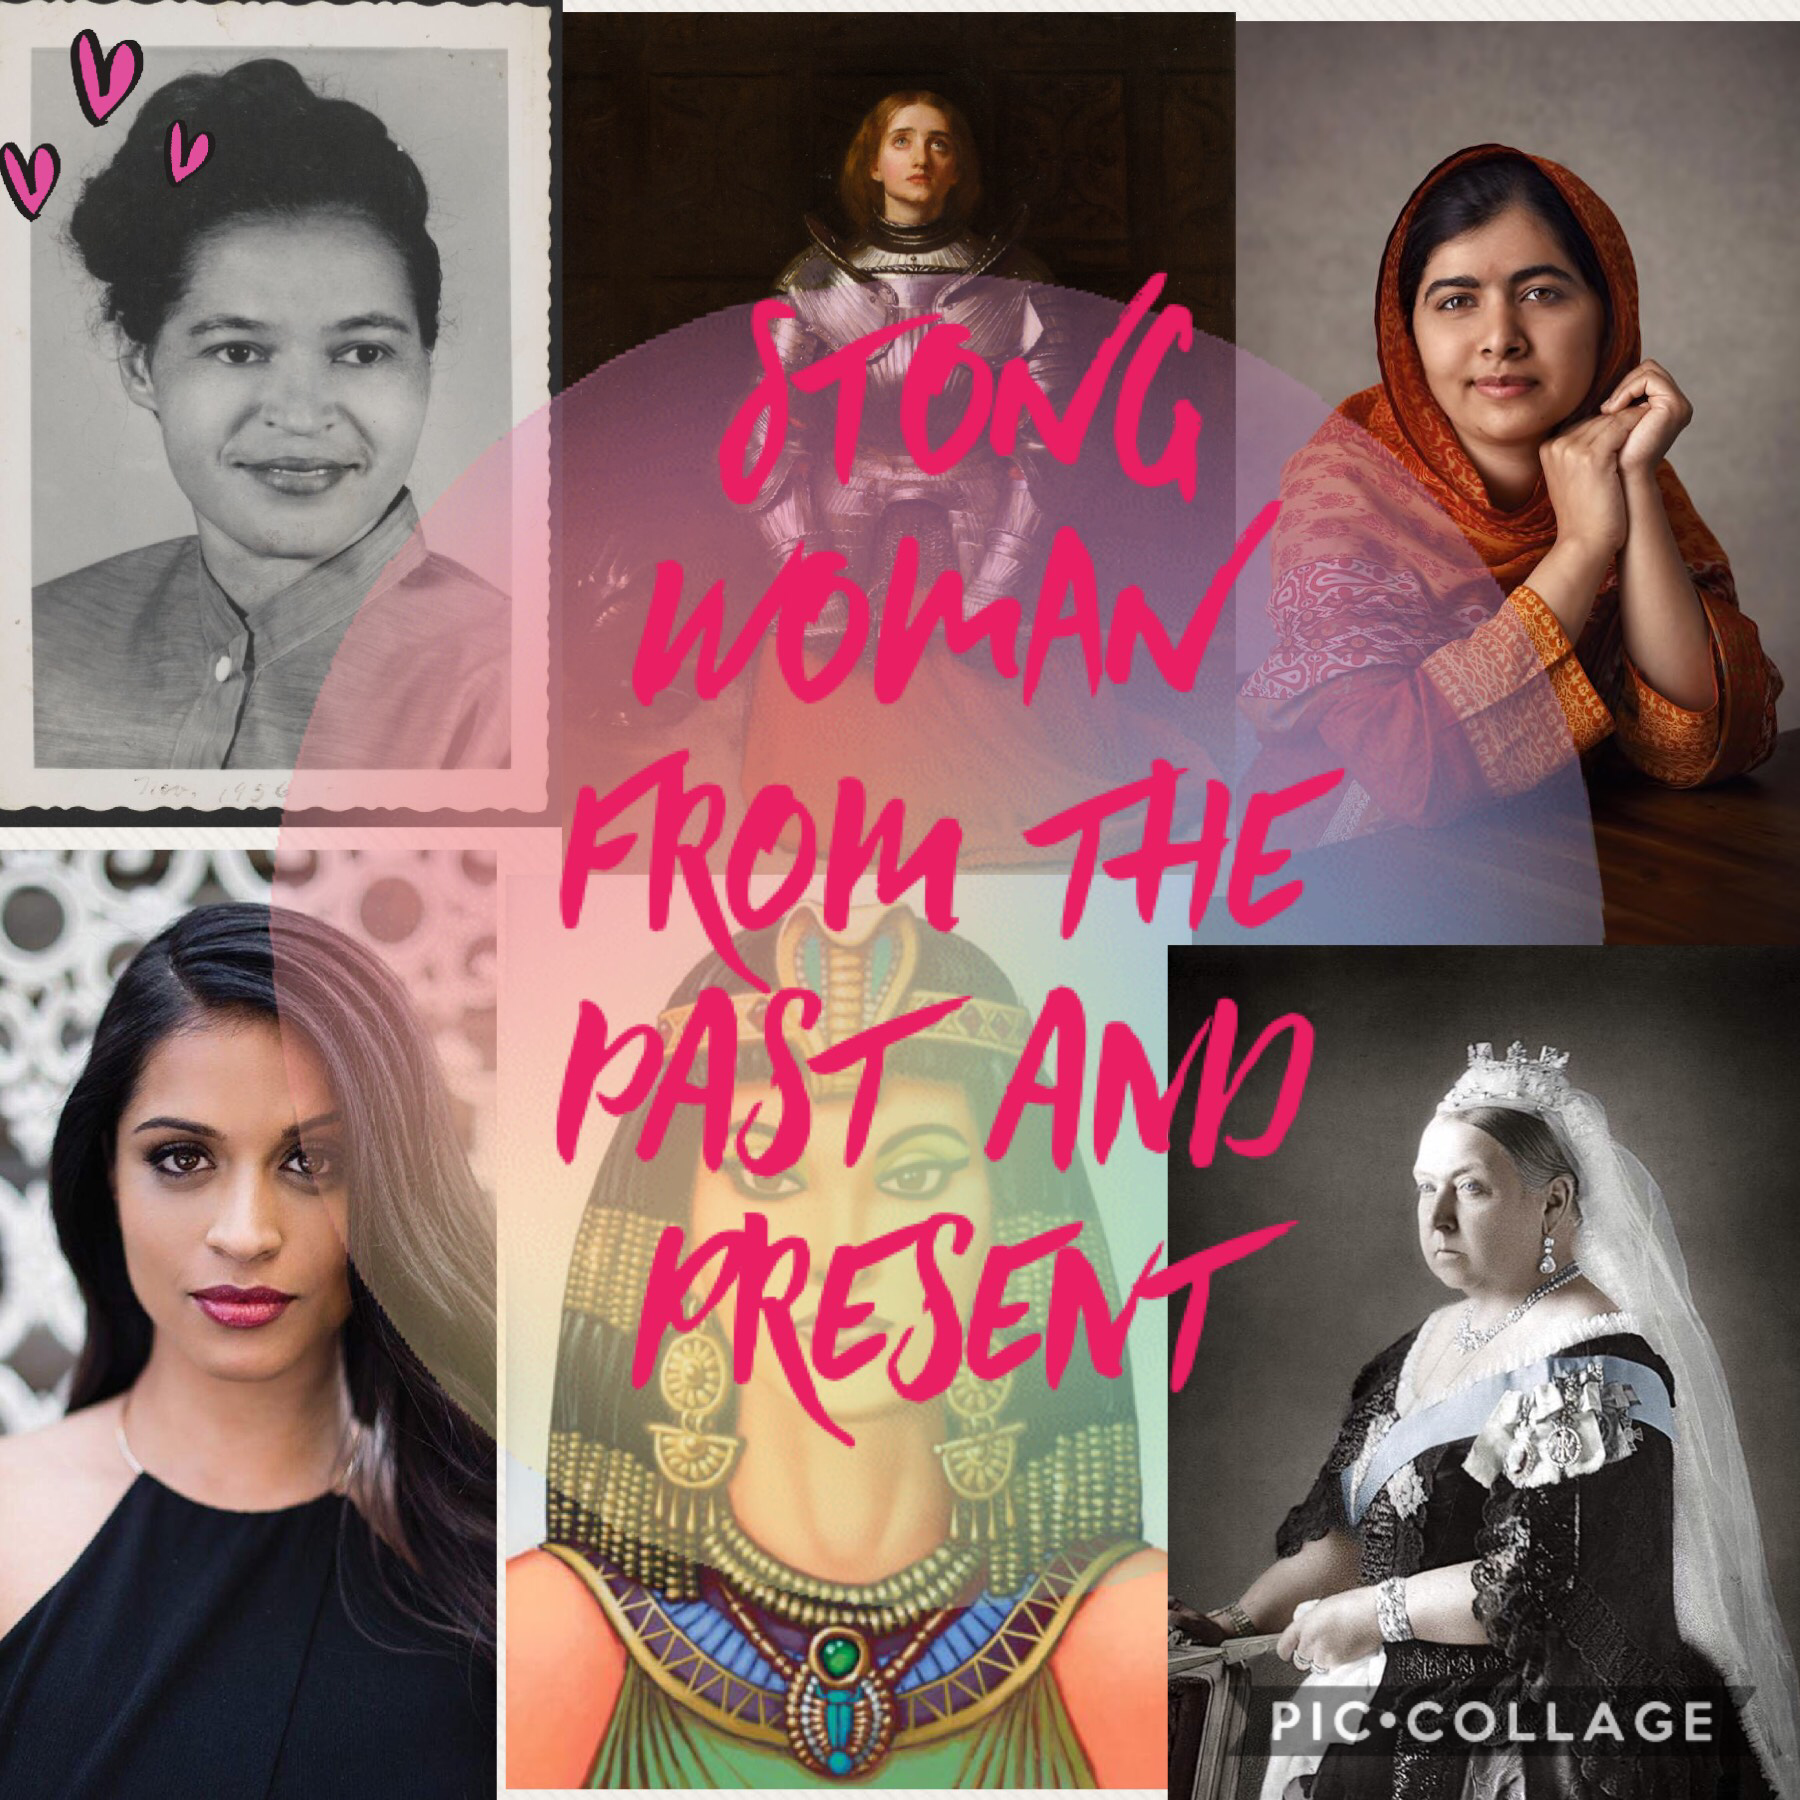 Here are some strings woman from the past and present. 
Rosa Park
Lily Singh
Joan of Arcadia 
Cleopatra 
Malala Yousafzai
Queen Victoria 
And there are so many more...❤️
